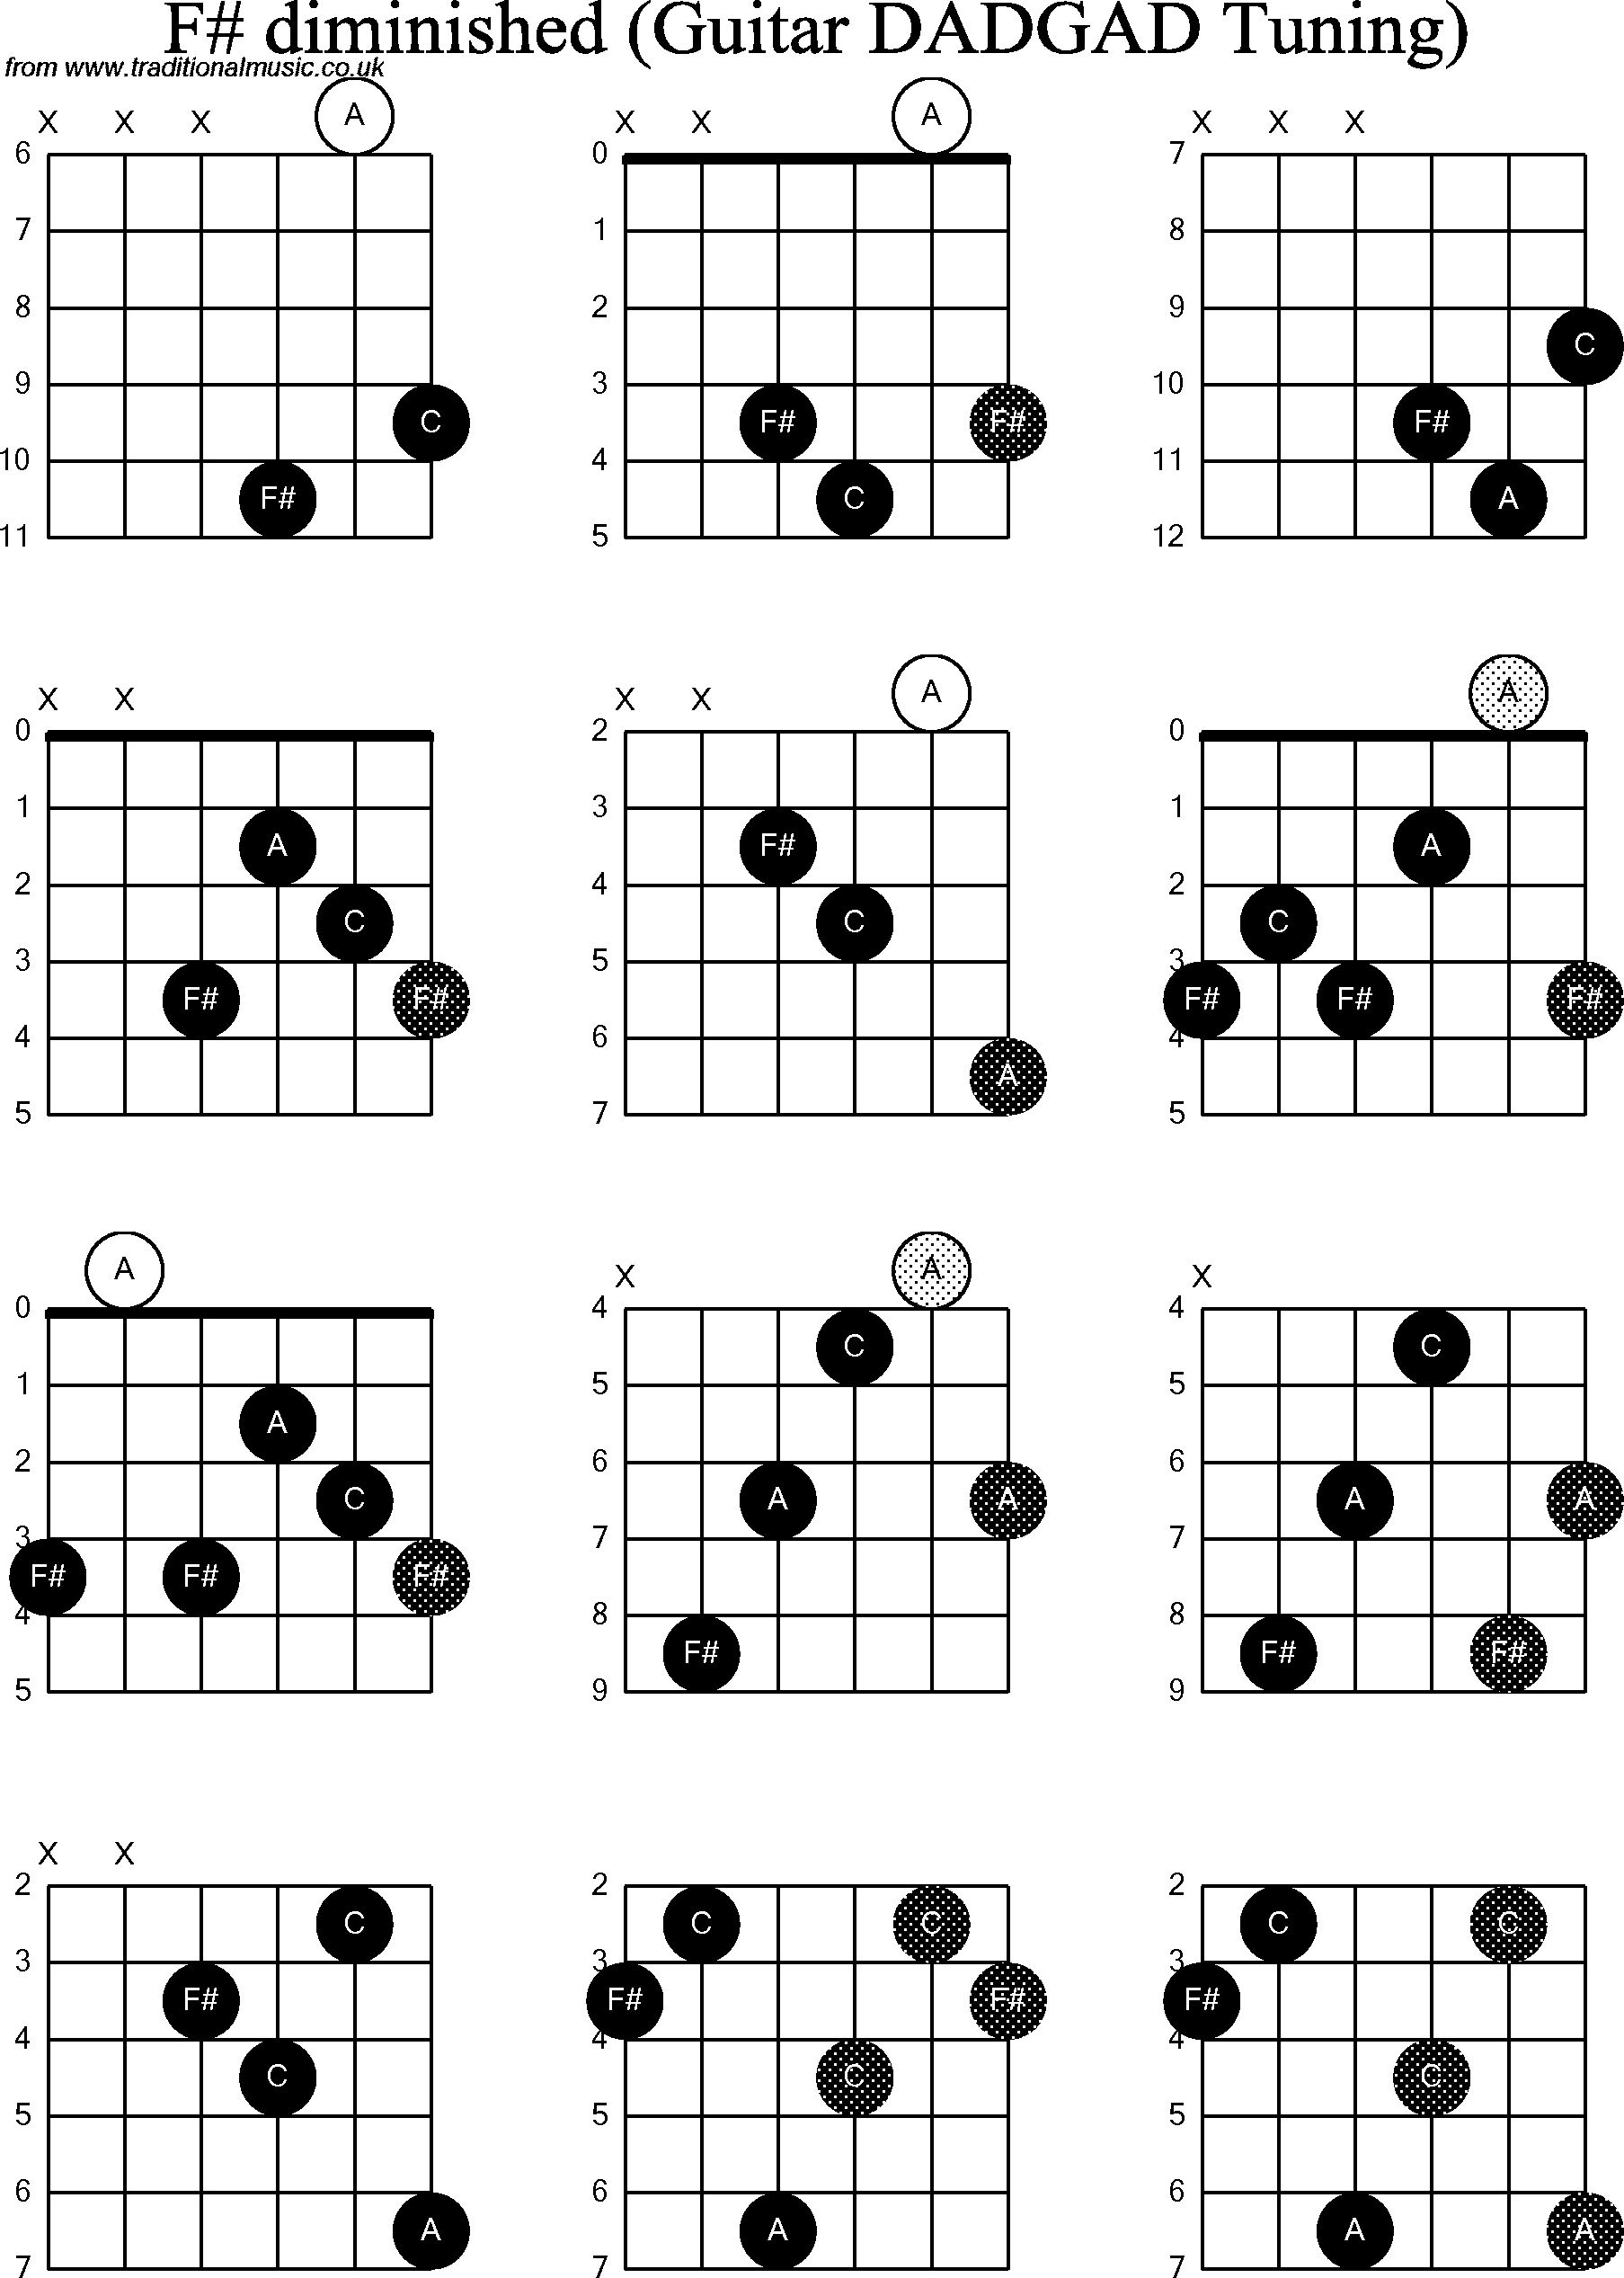 Chord Diagrams for D Modal Guitar(DADGAD), F Sharp Diminished